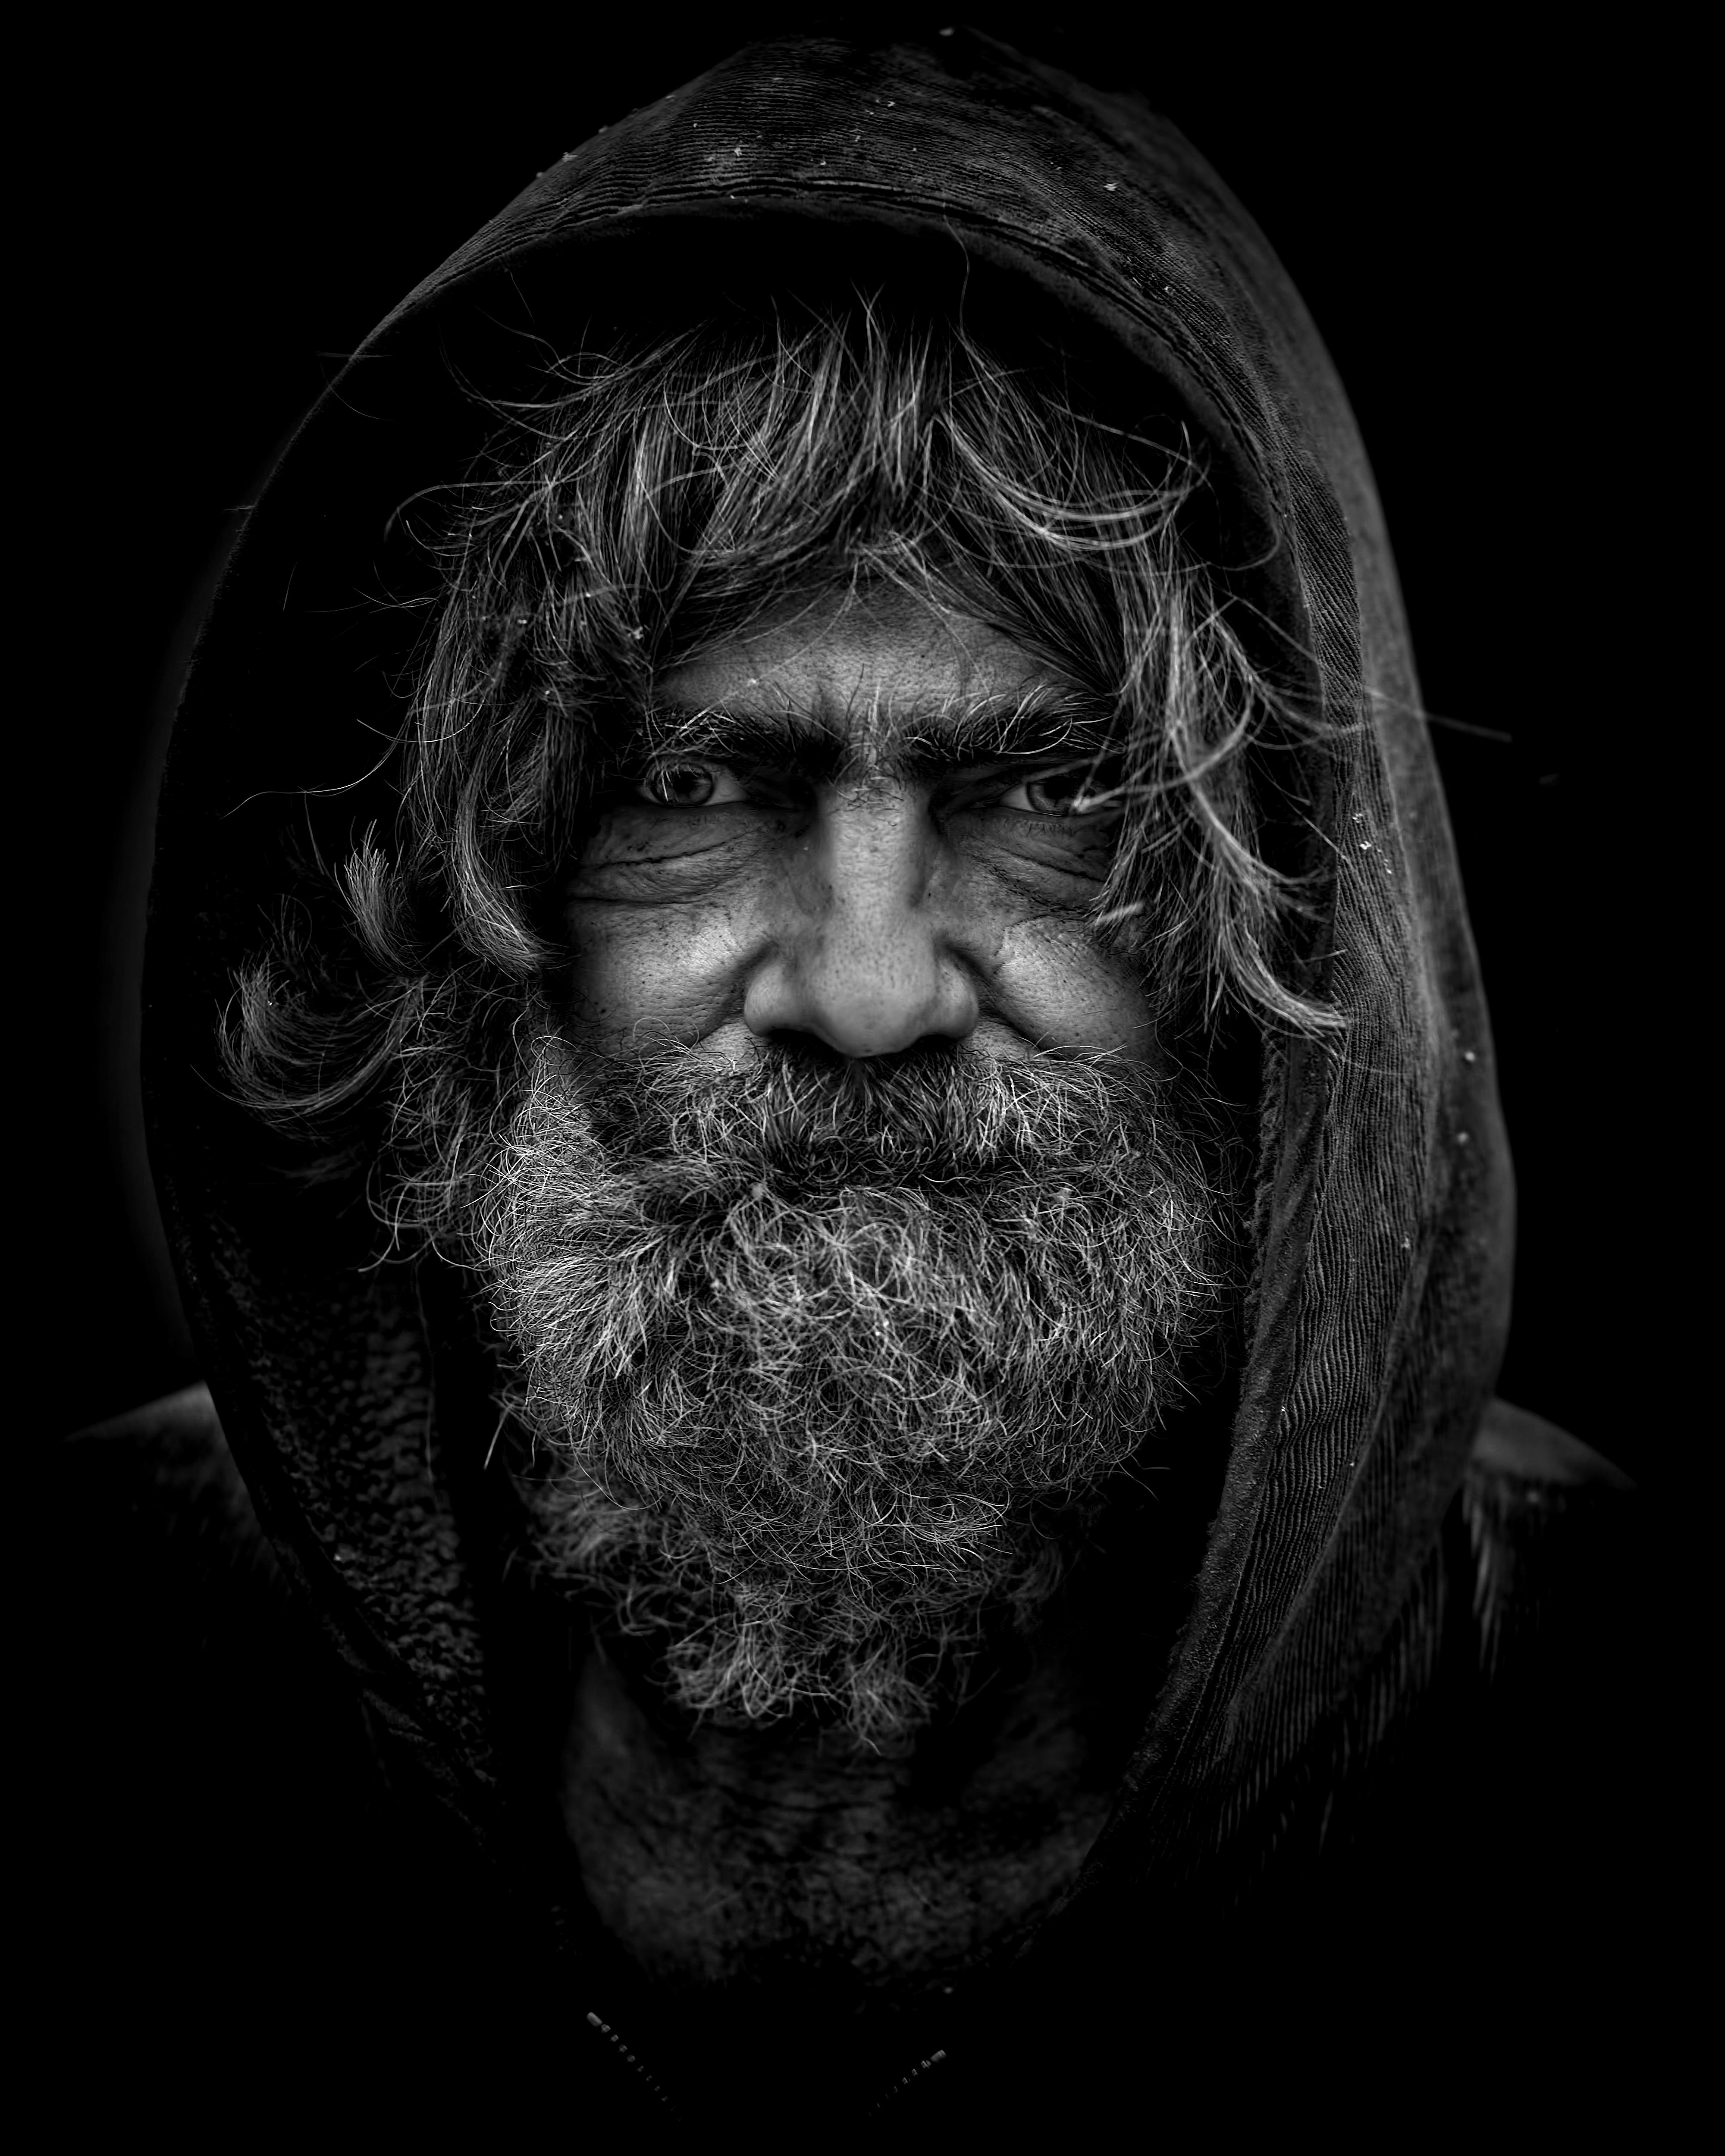 Pictured - An old man with beard wearing a hoodie | Source: Pexels 